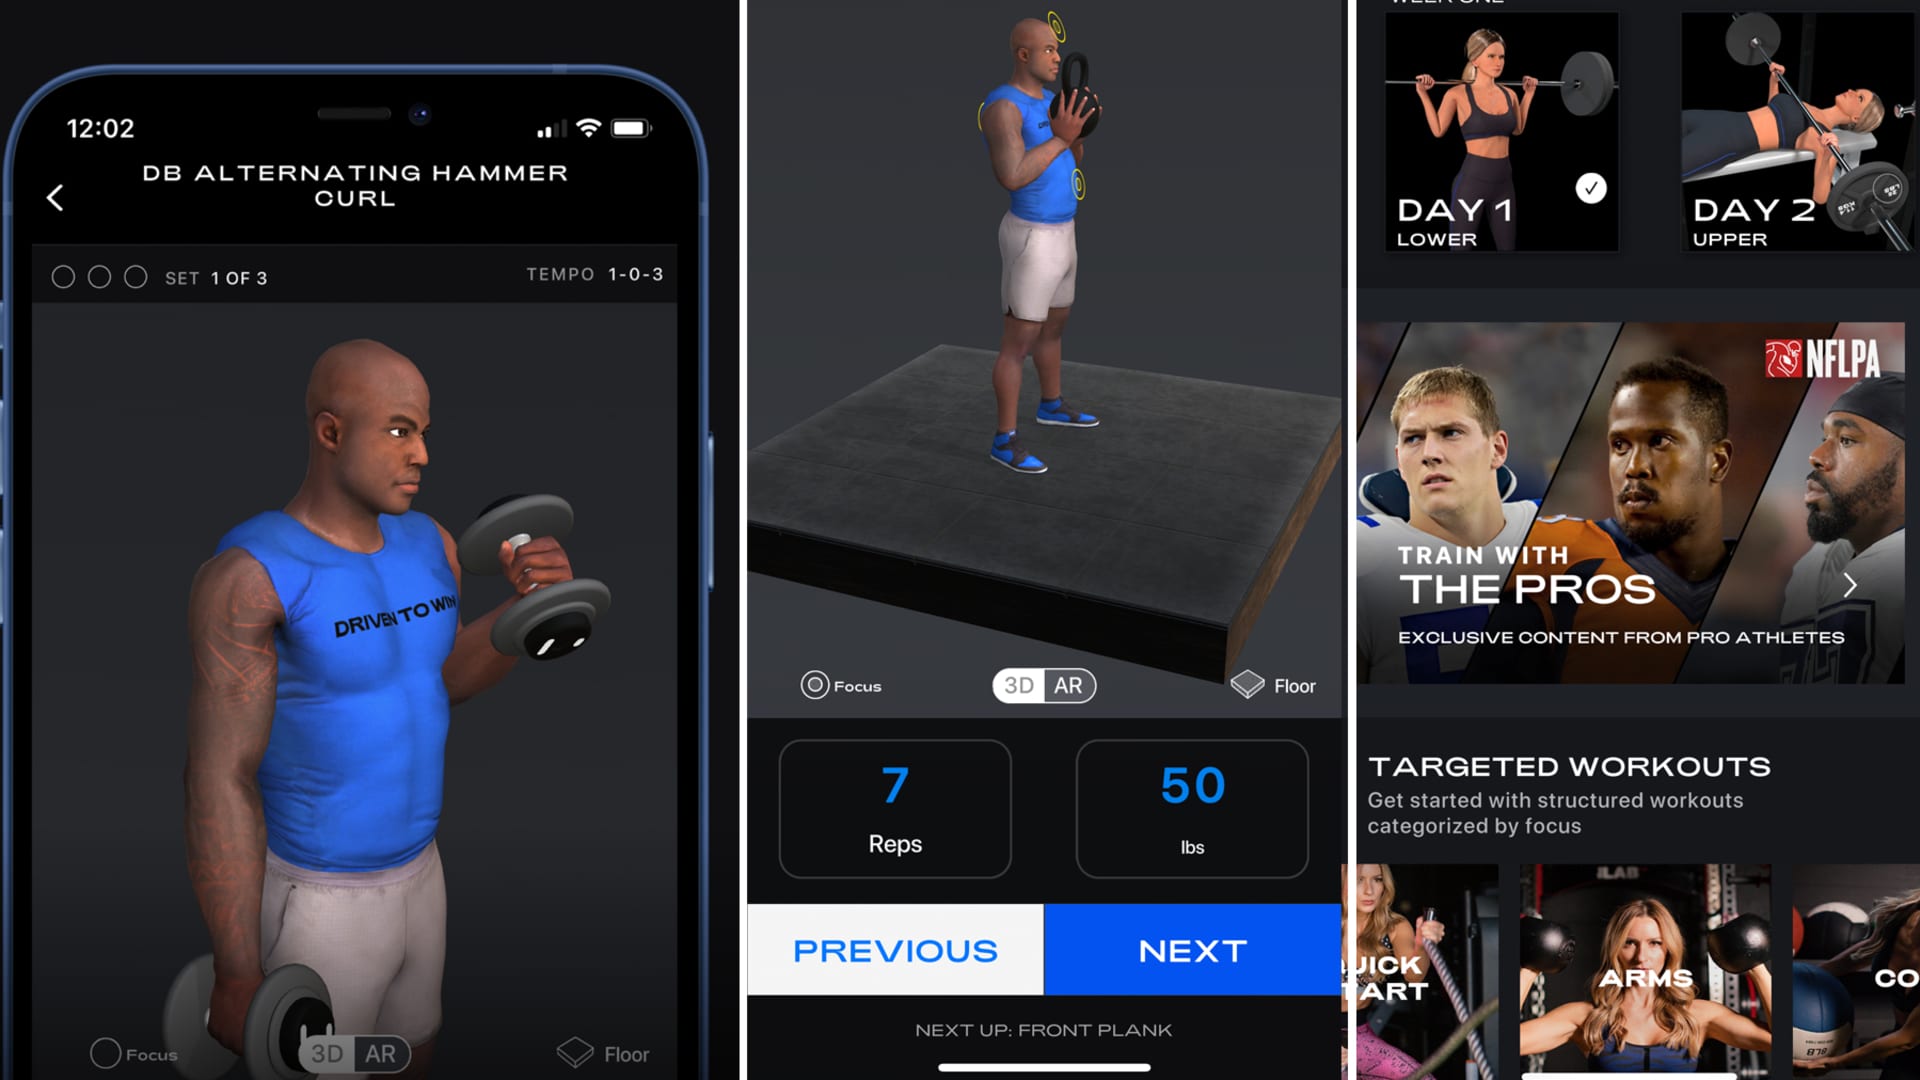 Former NFL linebacker DeMarcus Ware announcing the launch of Driven To Win (D2W), a new fitness app available for download on the App Store.